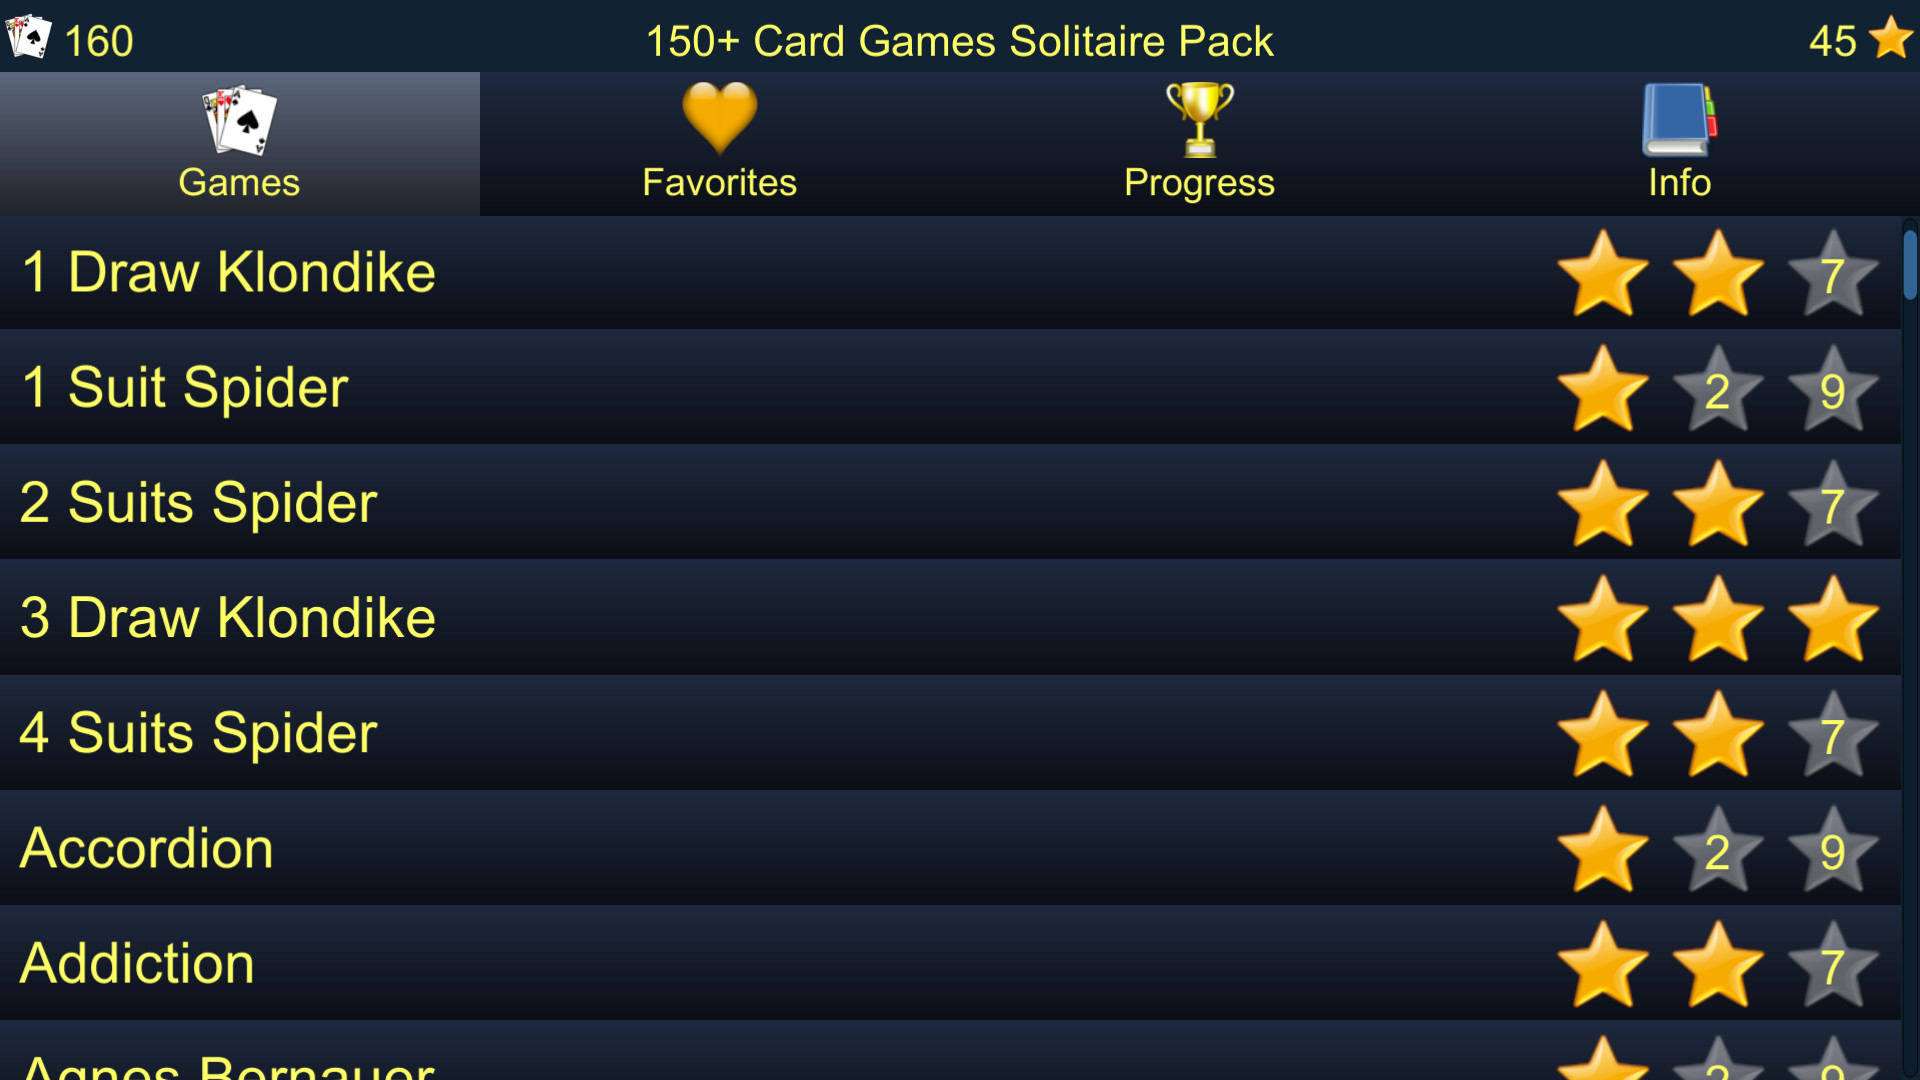 150+ Card Games Solitaire Pack Steam CD Key 0.63 usd